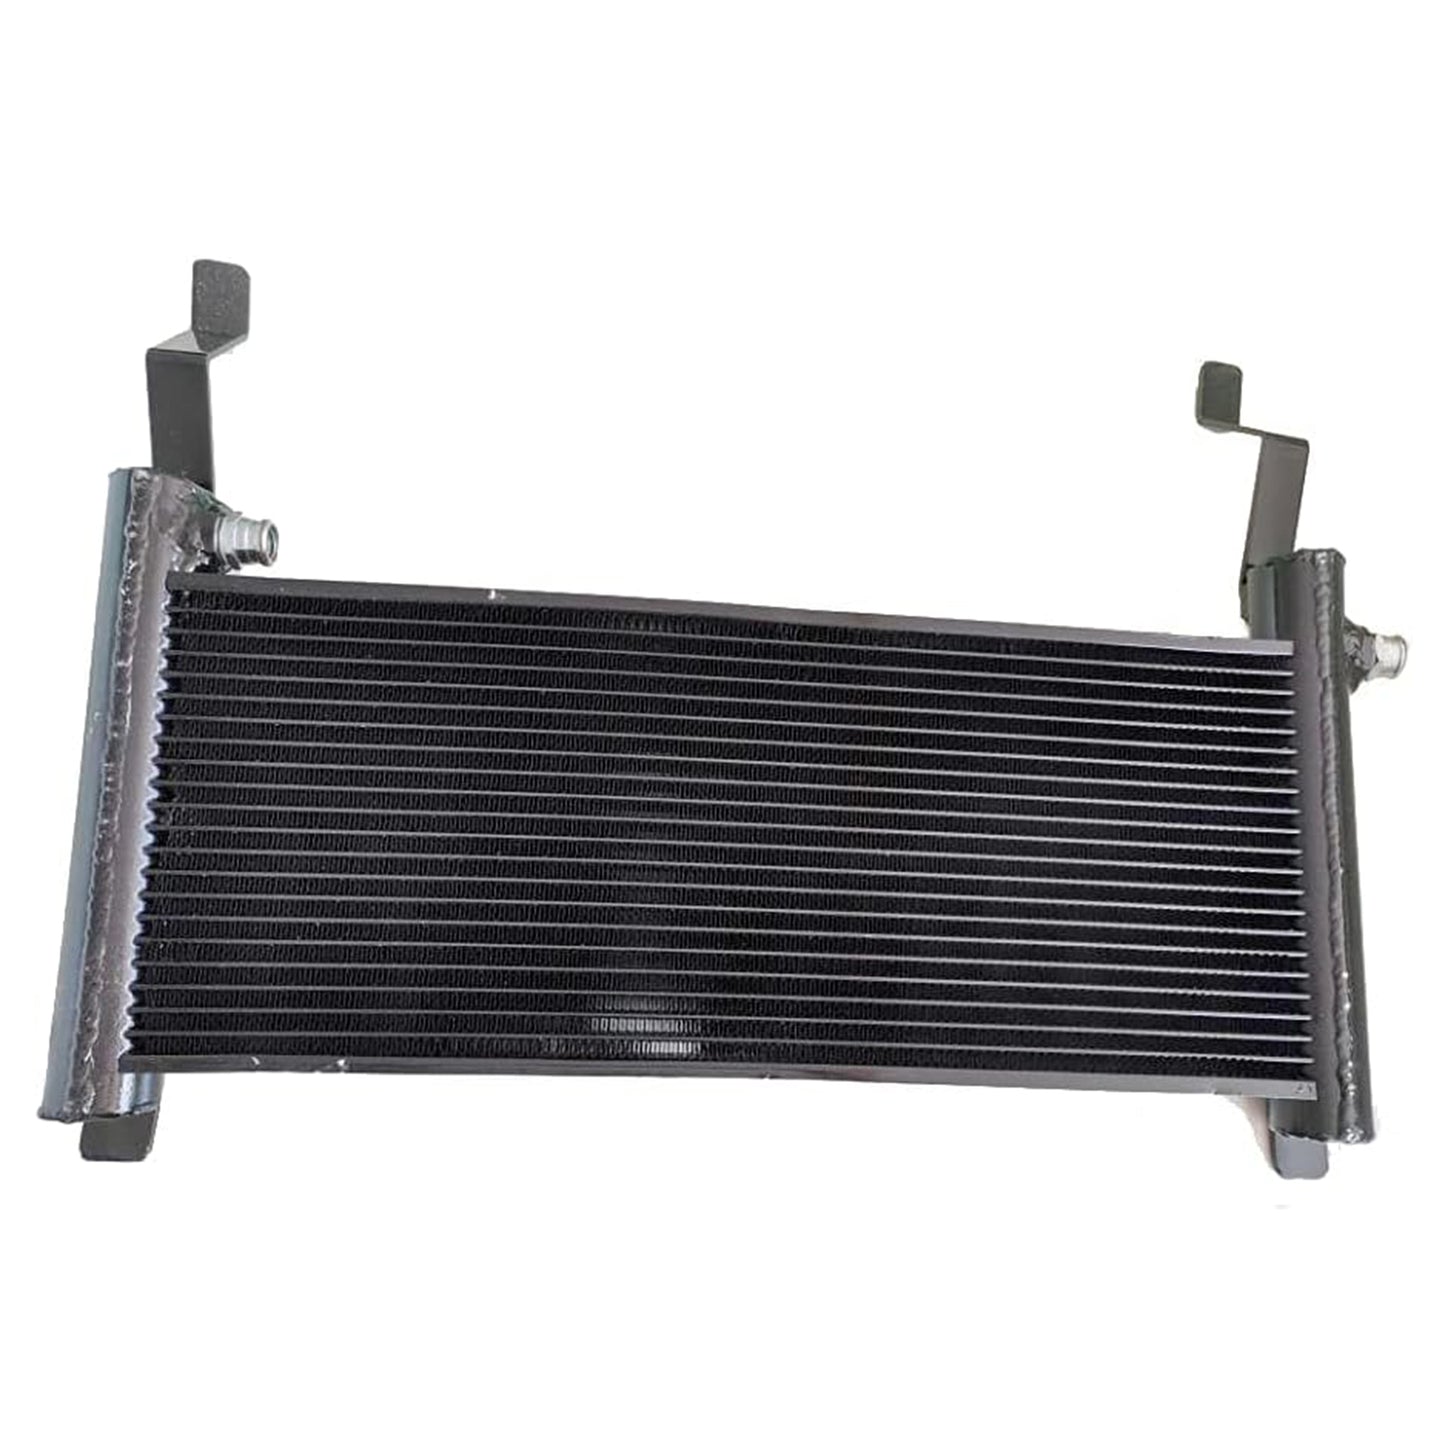 7109582 Hydraulic Oil Cooler Compatible With Bobcat S150 S160 S175 S185 S205 T180 T190